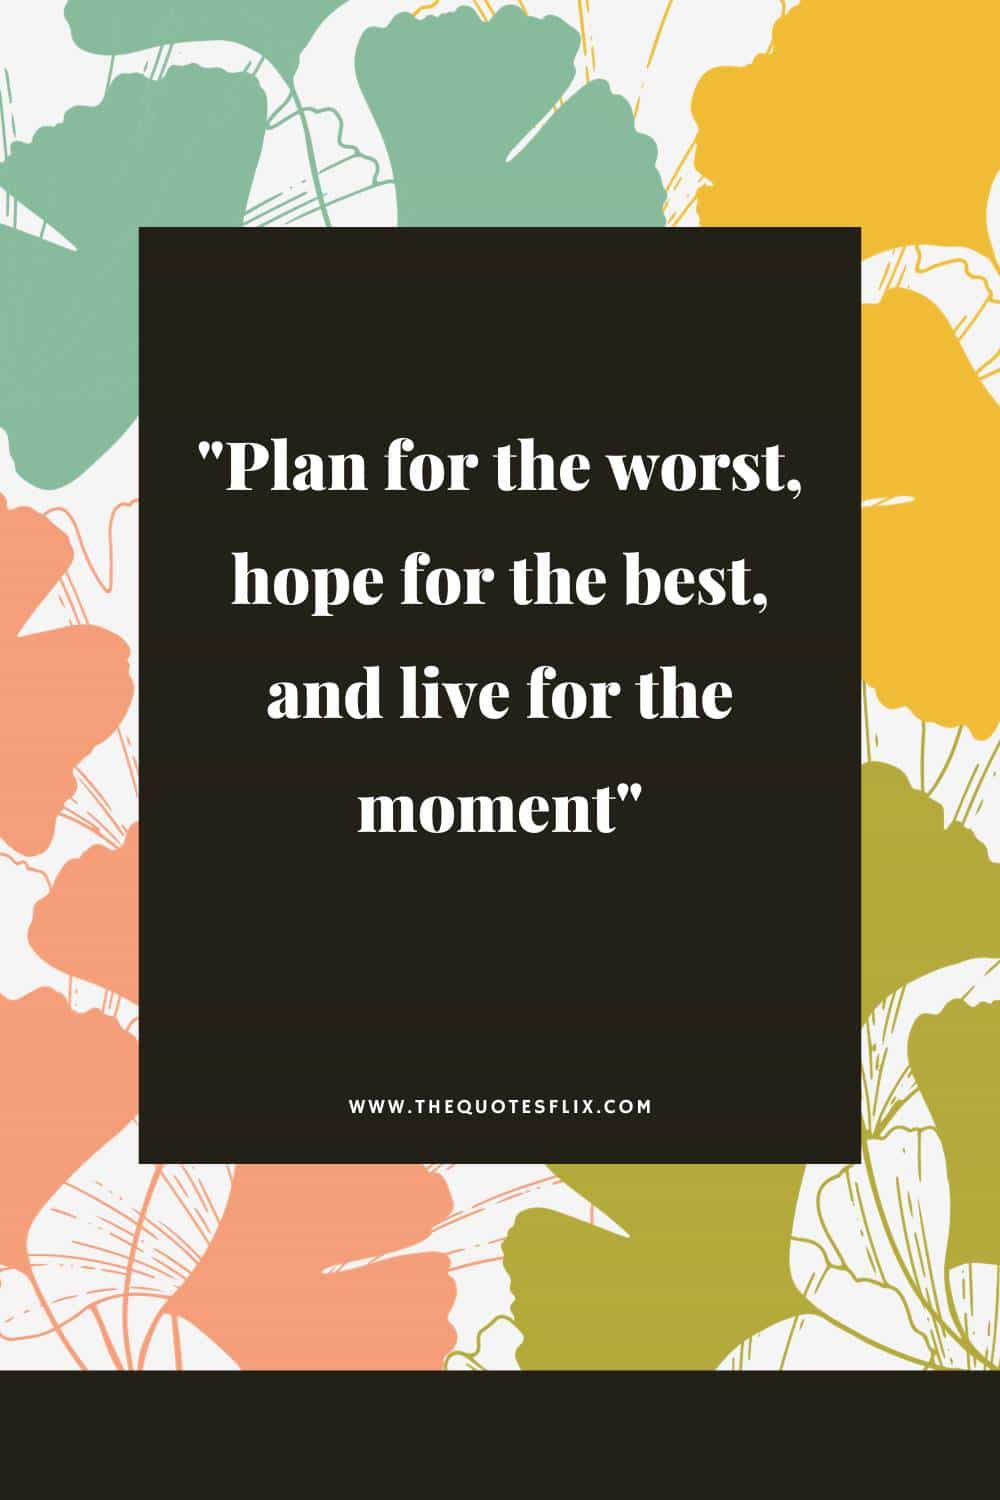 cancer survivor quotes - plan for worst live for moment